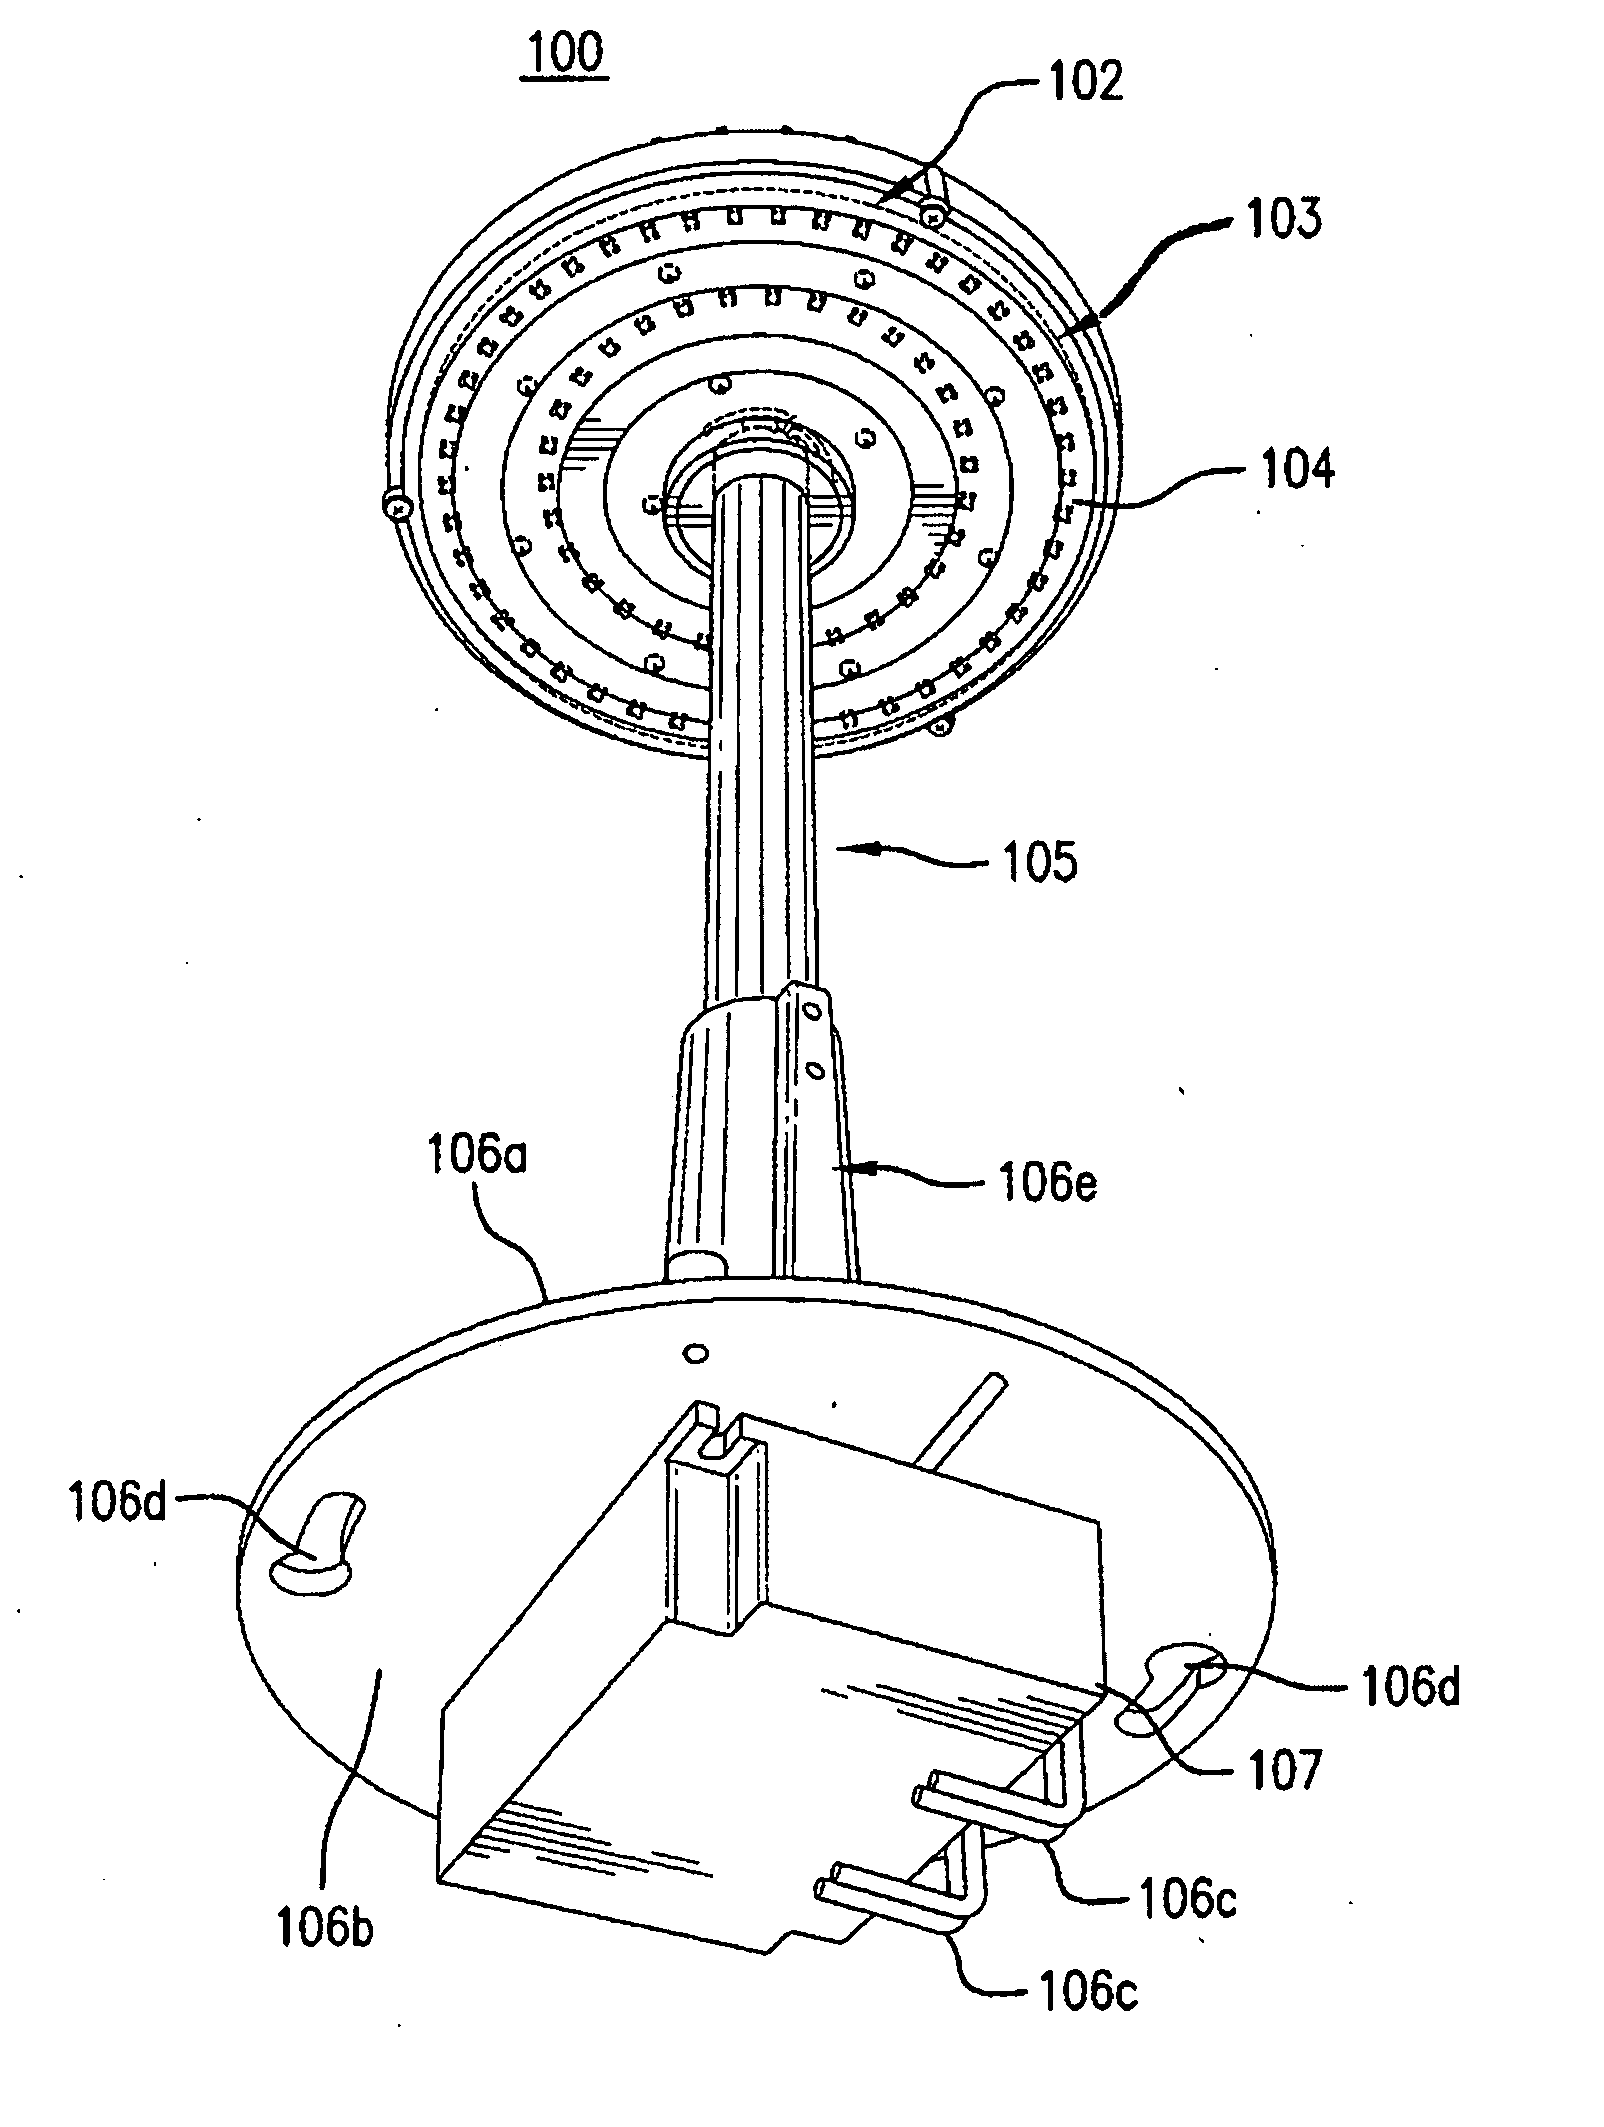 Systems and methods for retrofitting existing lighting systems